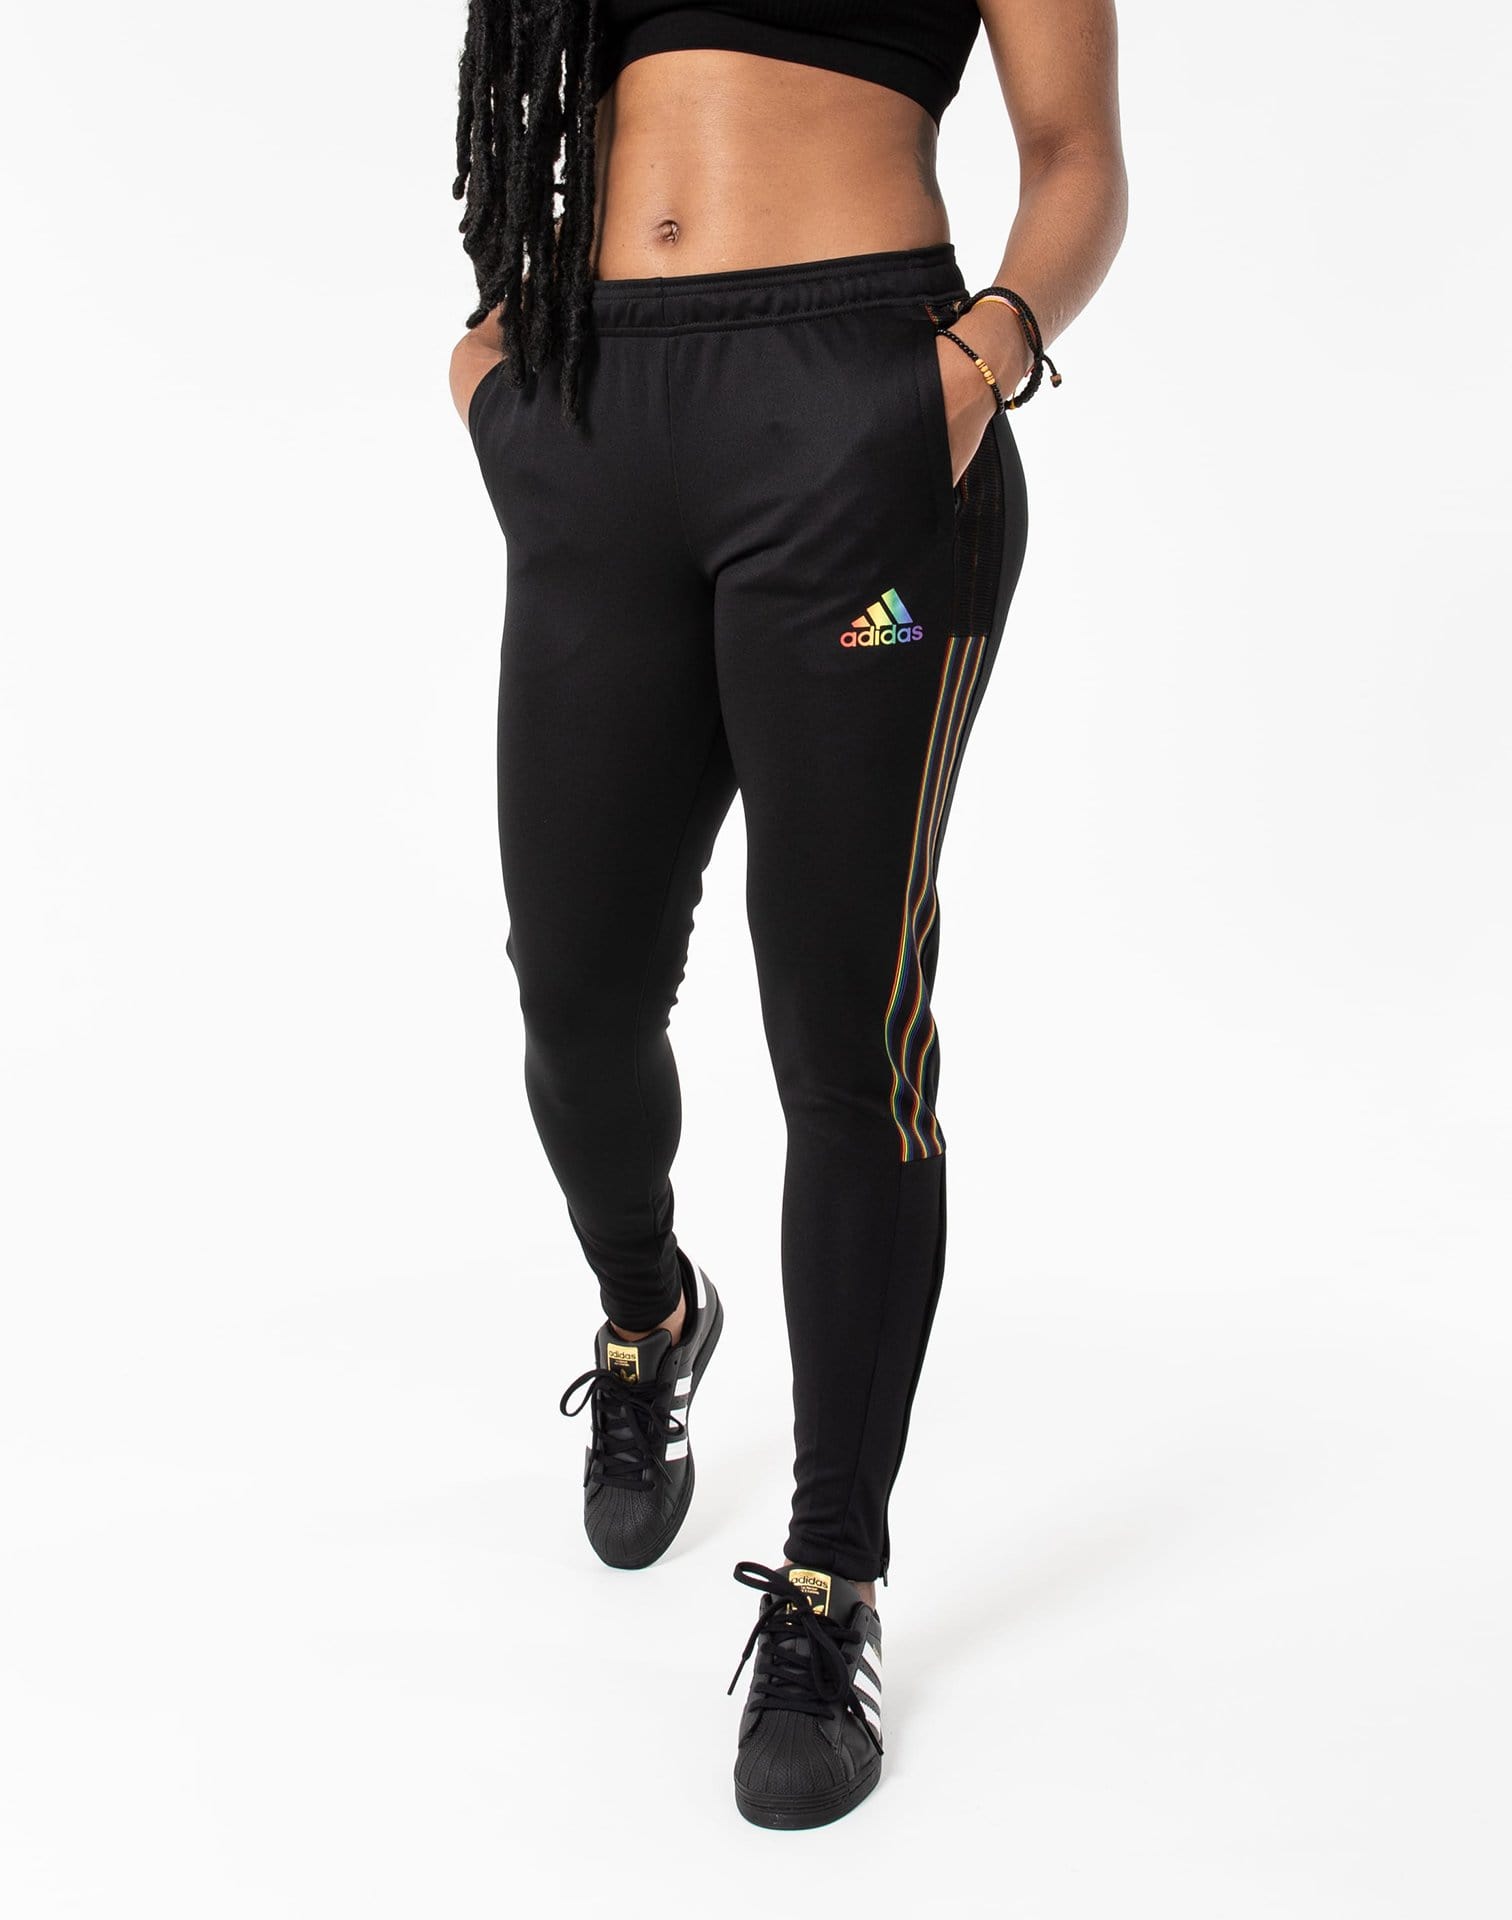 Adidas Gold Track Pants for Women